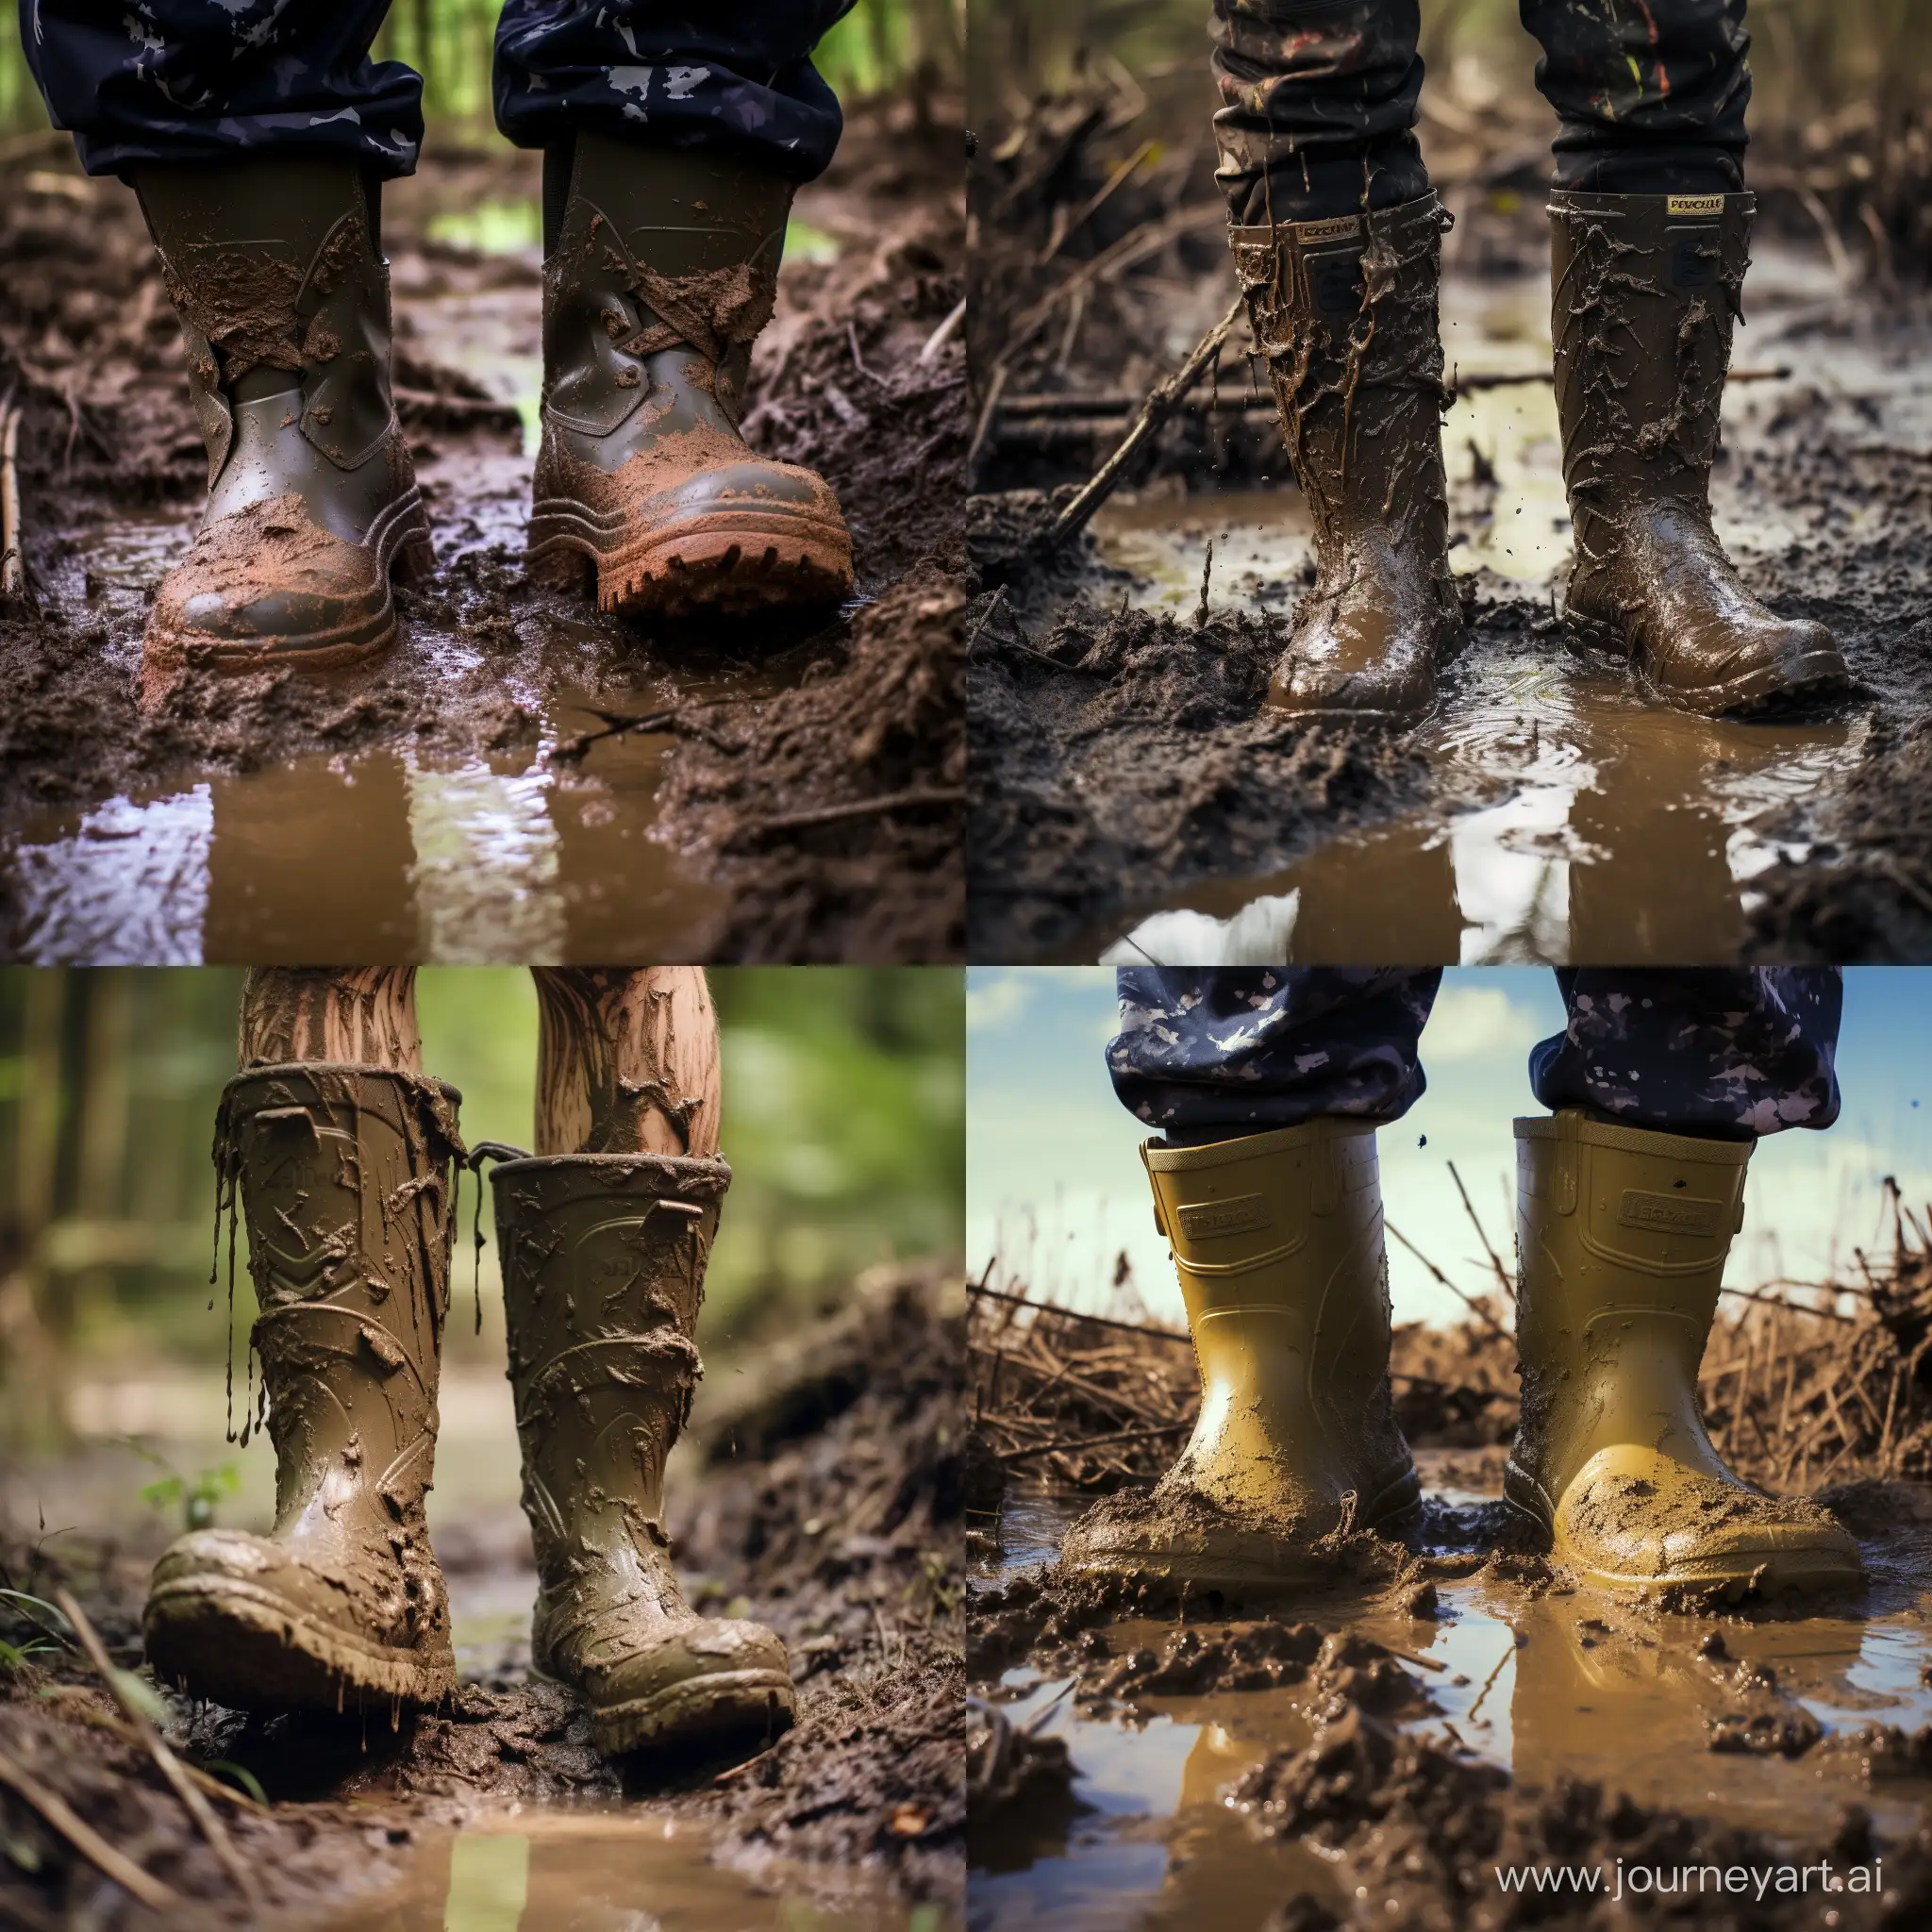 Children-Playing-Joyfully-in-Mud-with-Rubber-Boots